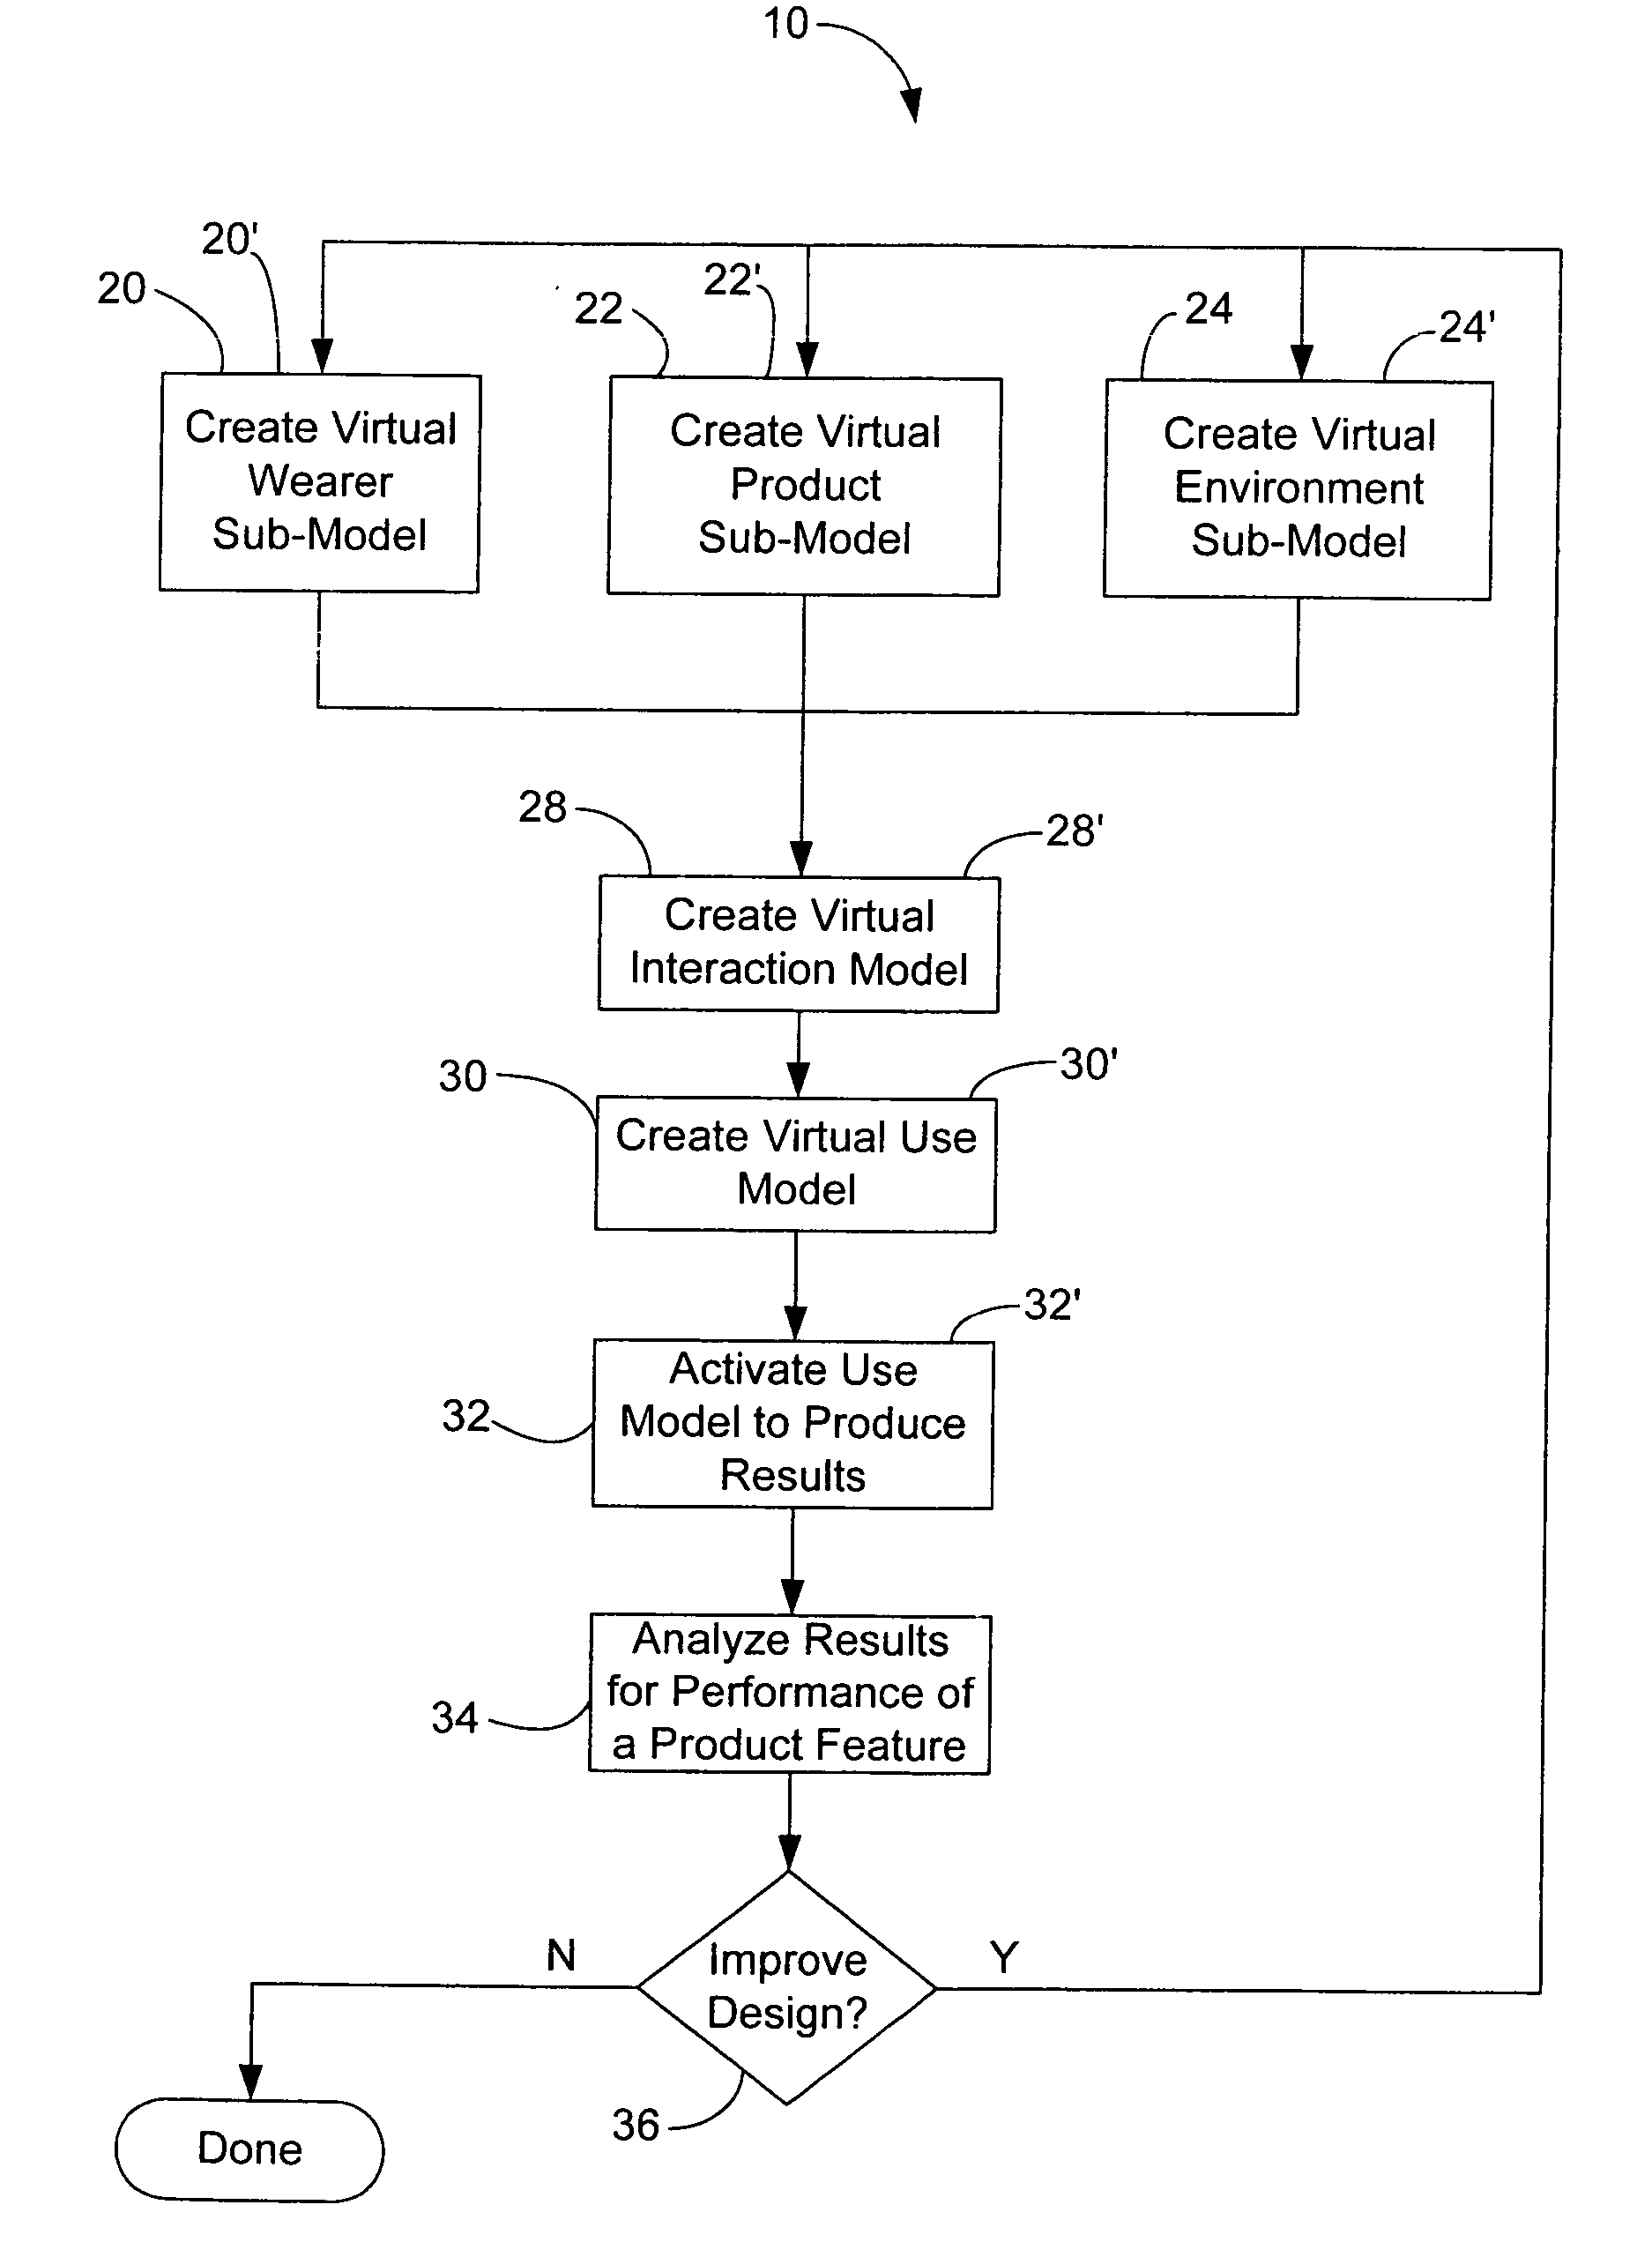 Method of evaluating the performance of a product using a virtual environment